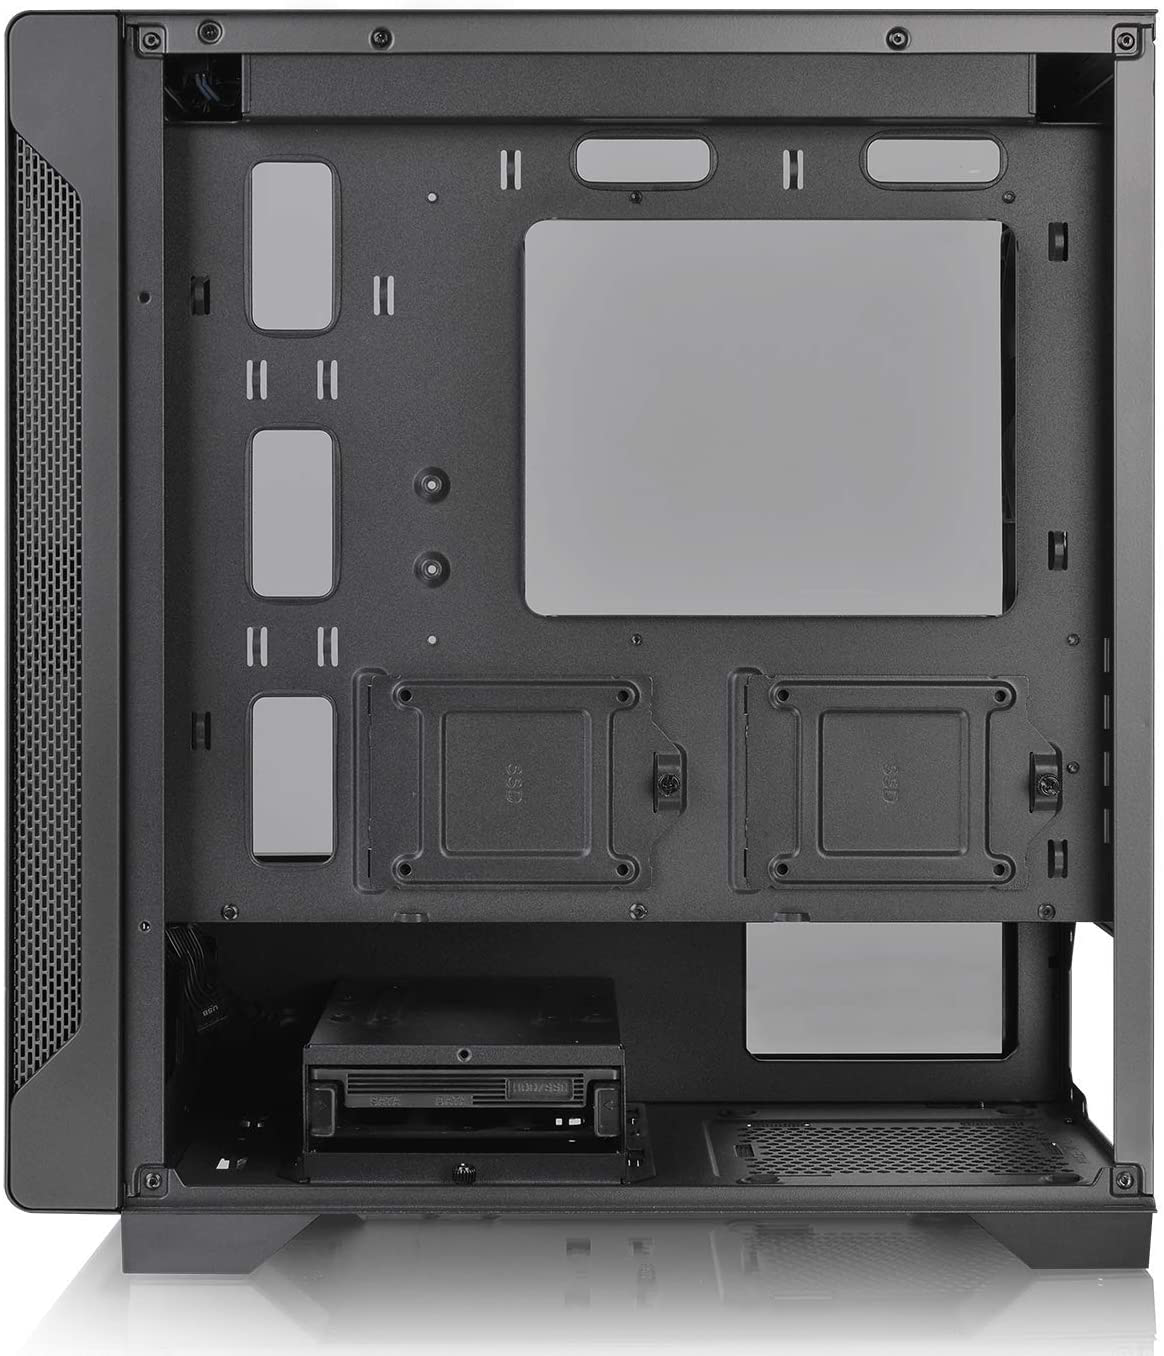 Thermaltake CA-1Q9-00S1WN-00 S100 Tempered Glass Black Edition Micro-Atx Mini-Tower Computer Case with 120Mm Rear Fan Pre-Installed